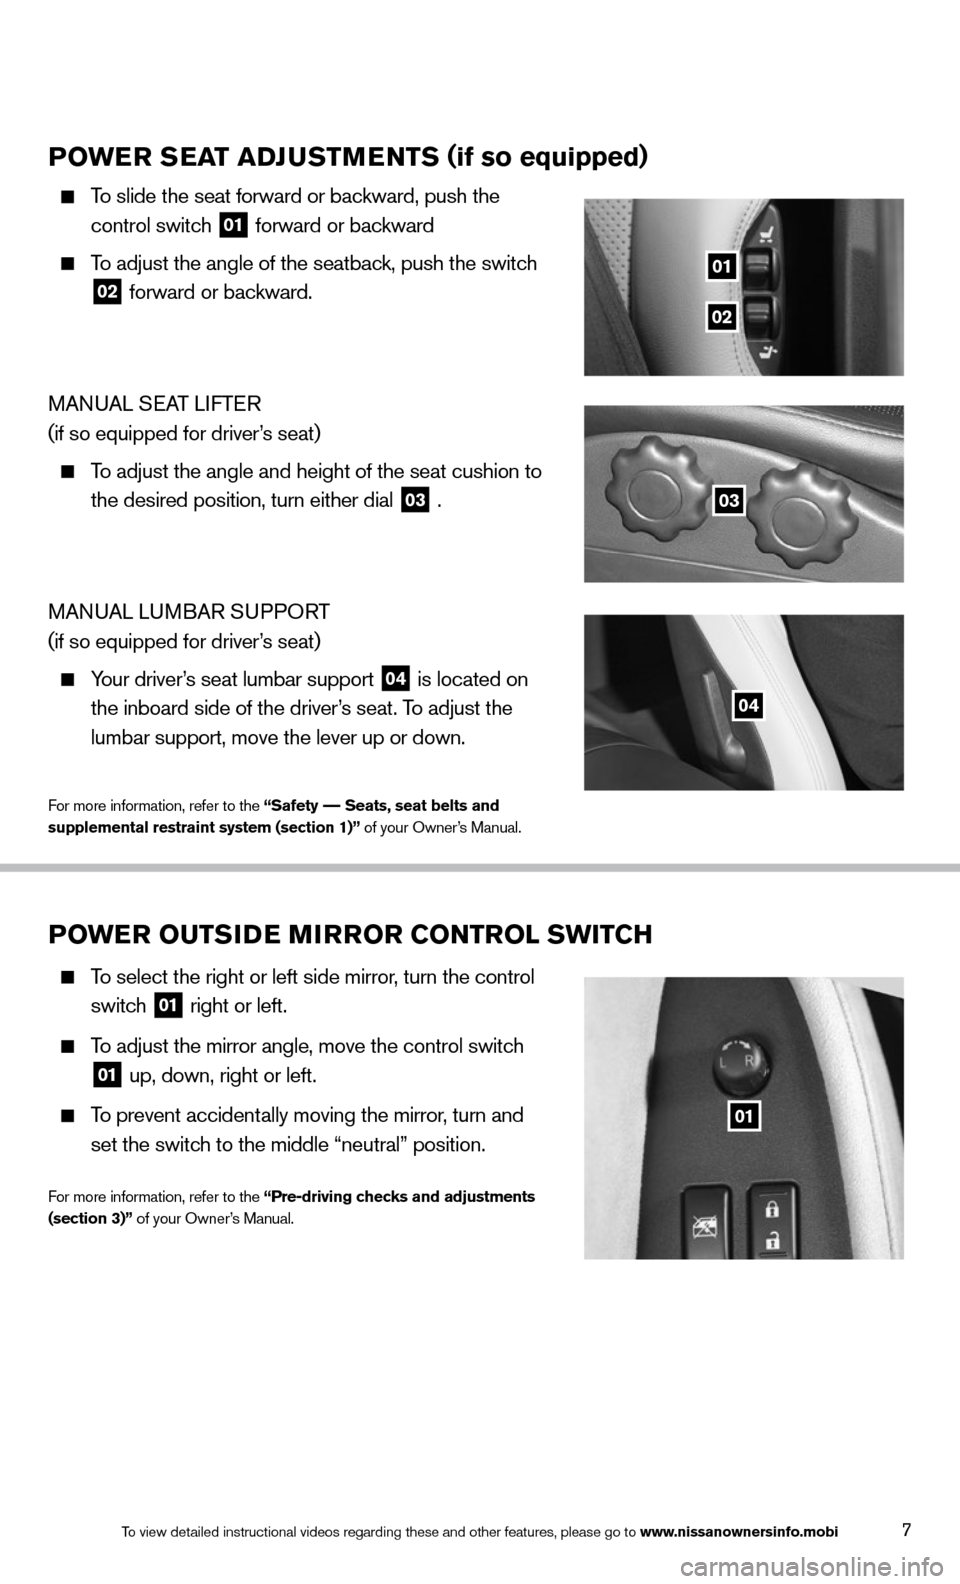 NISSAN 370Z ROADSTER 2014 Z34 Quick Reference Guide 7
POWER SEAT ADJUSTMENTS (if so equipped)
    To slide the seat forward or backward, push the   
control switch  
01 forward or backward
 
    To adjust the angle of the seatback, push the switch   
0